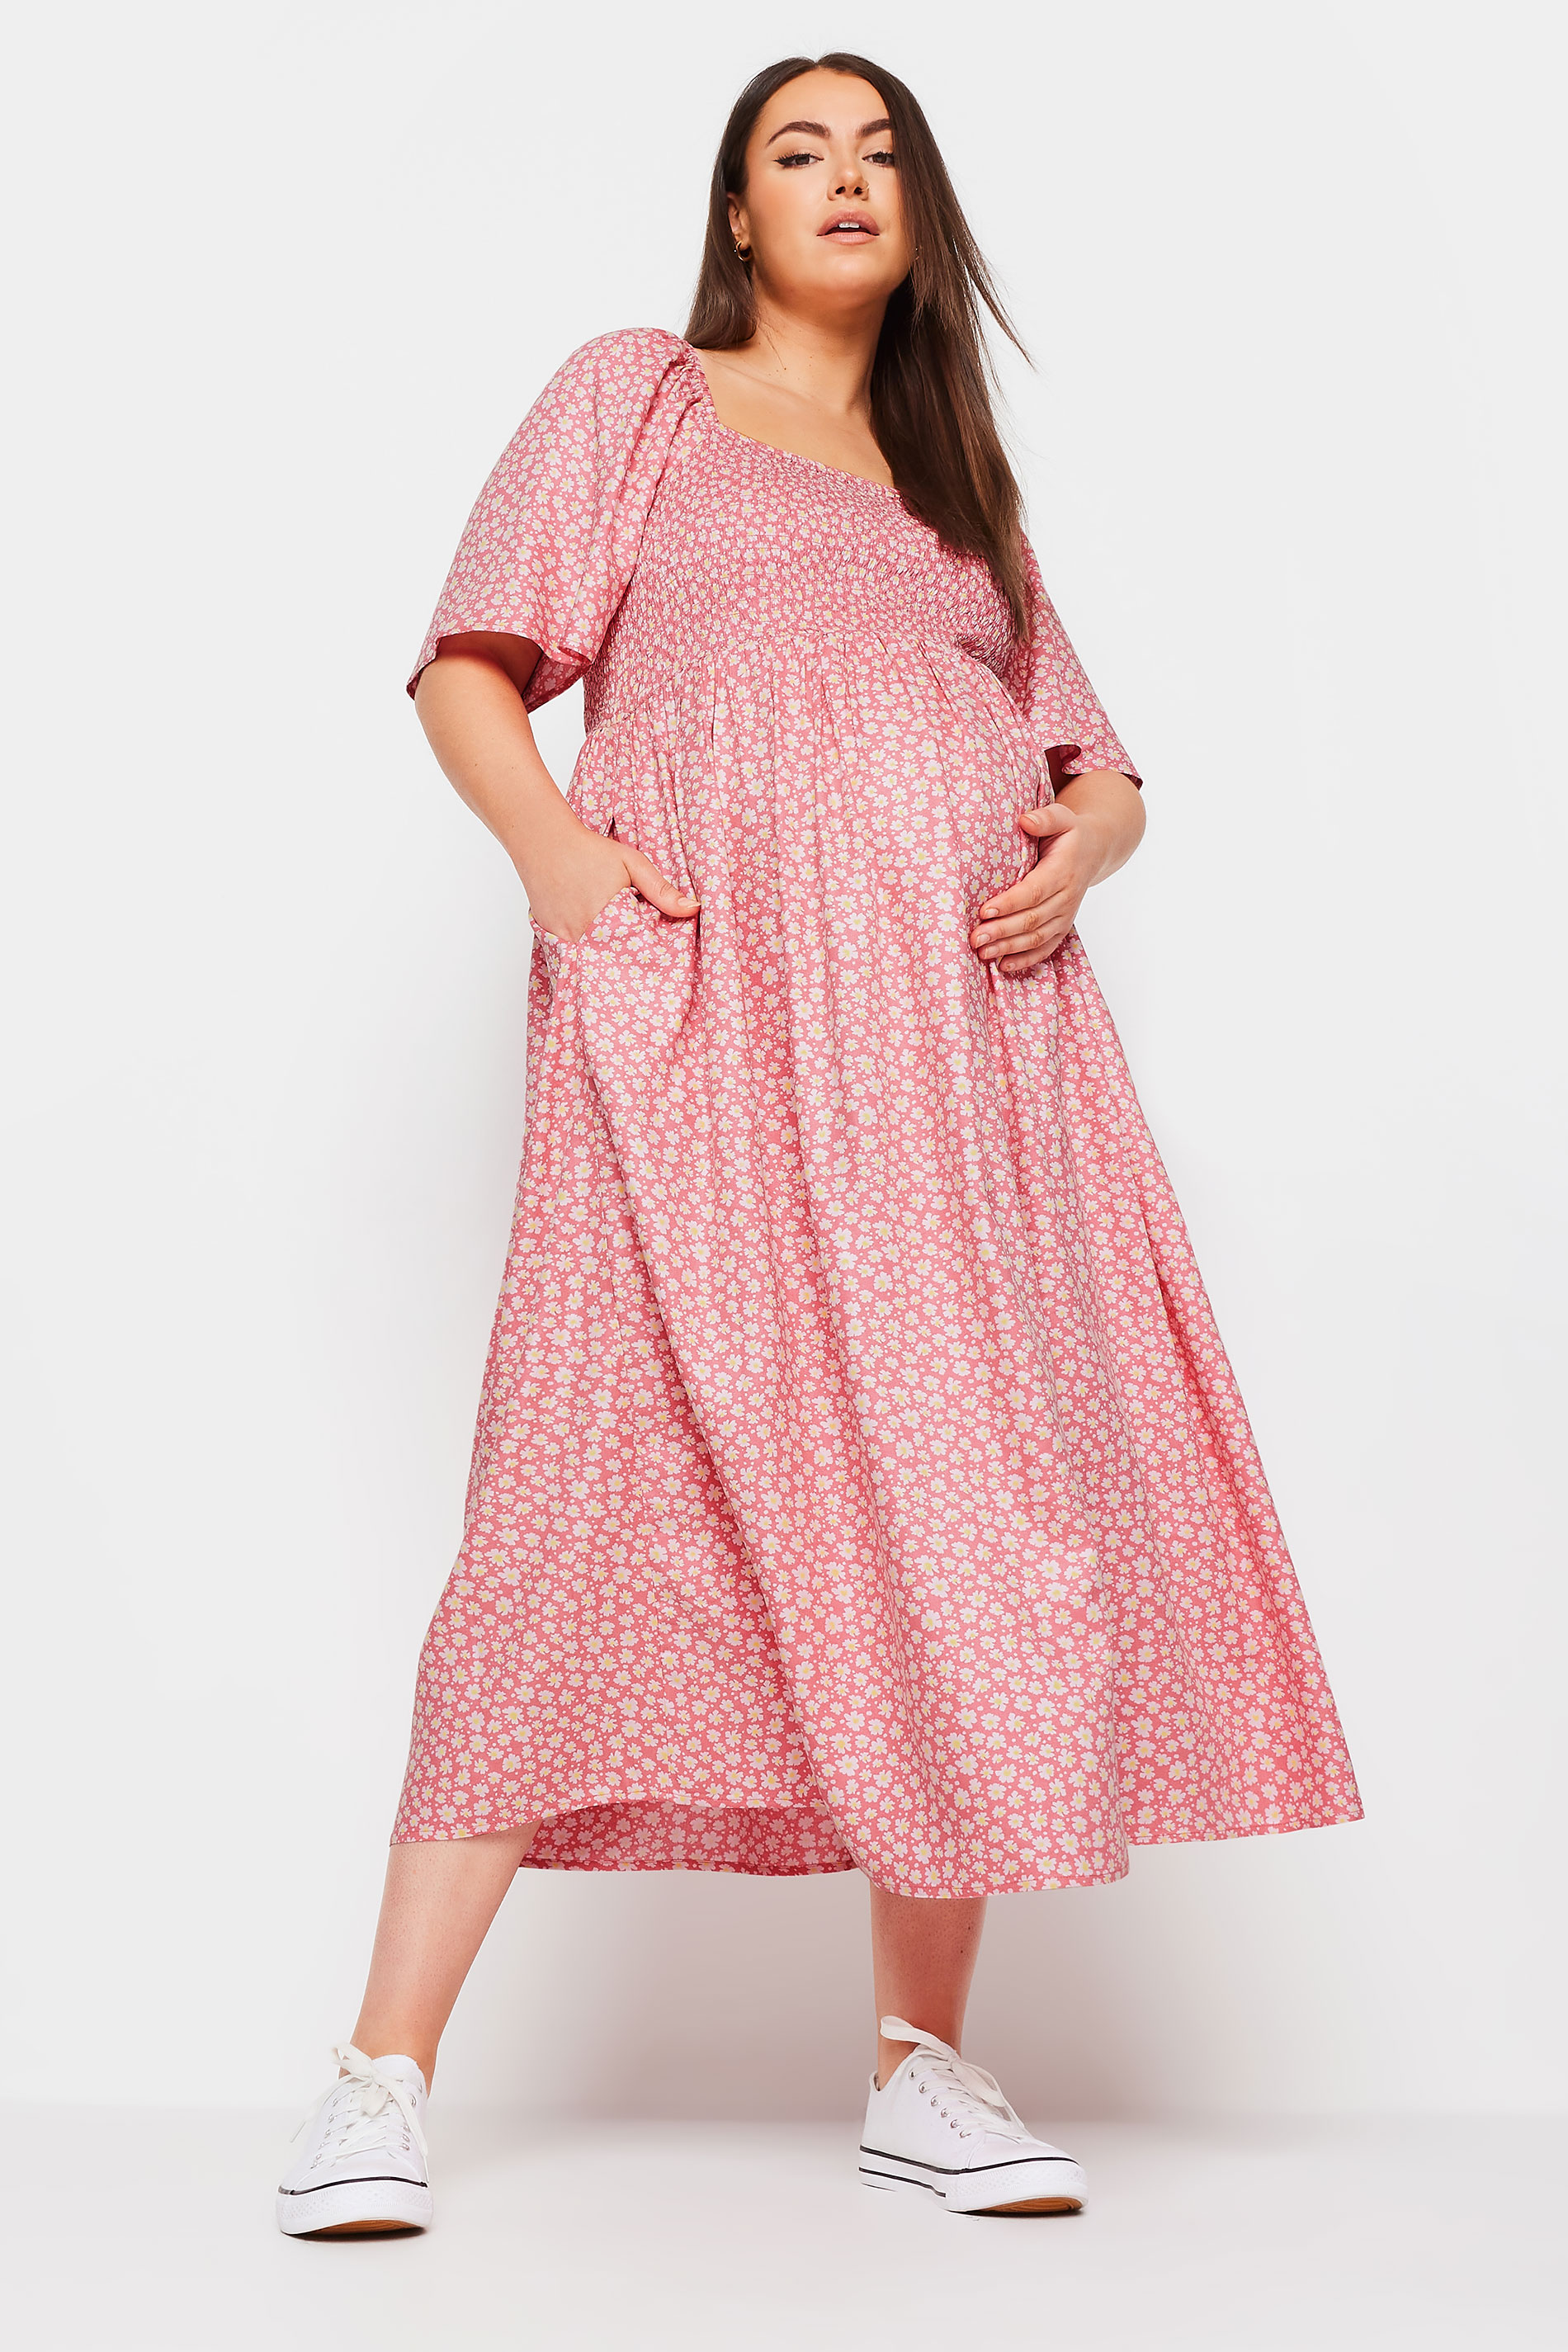 BUMP IT UP MATERNITY Plus Size Pink Floral Print Midaxi Dress | Yours Clothing 2